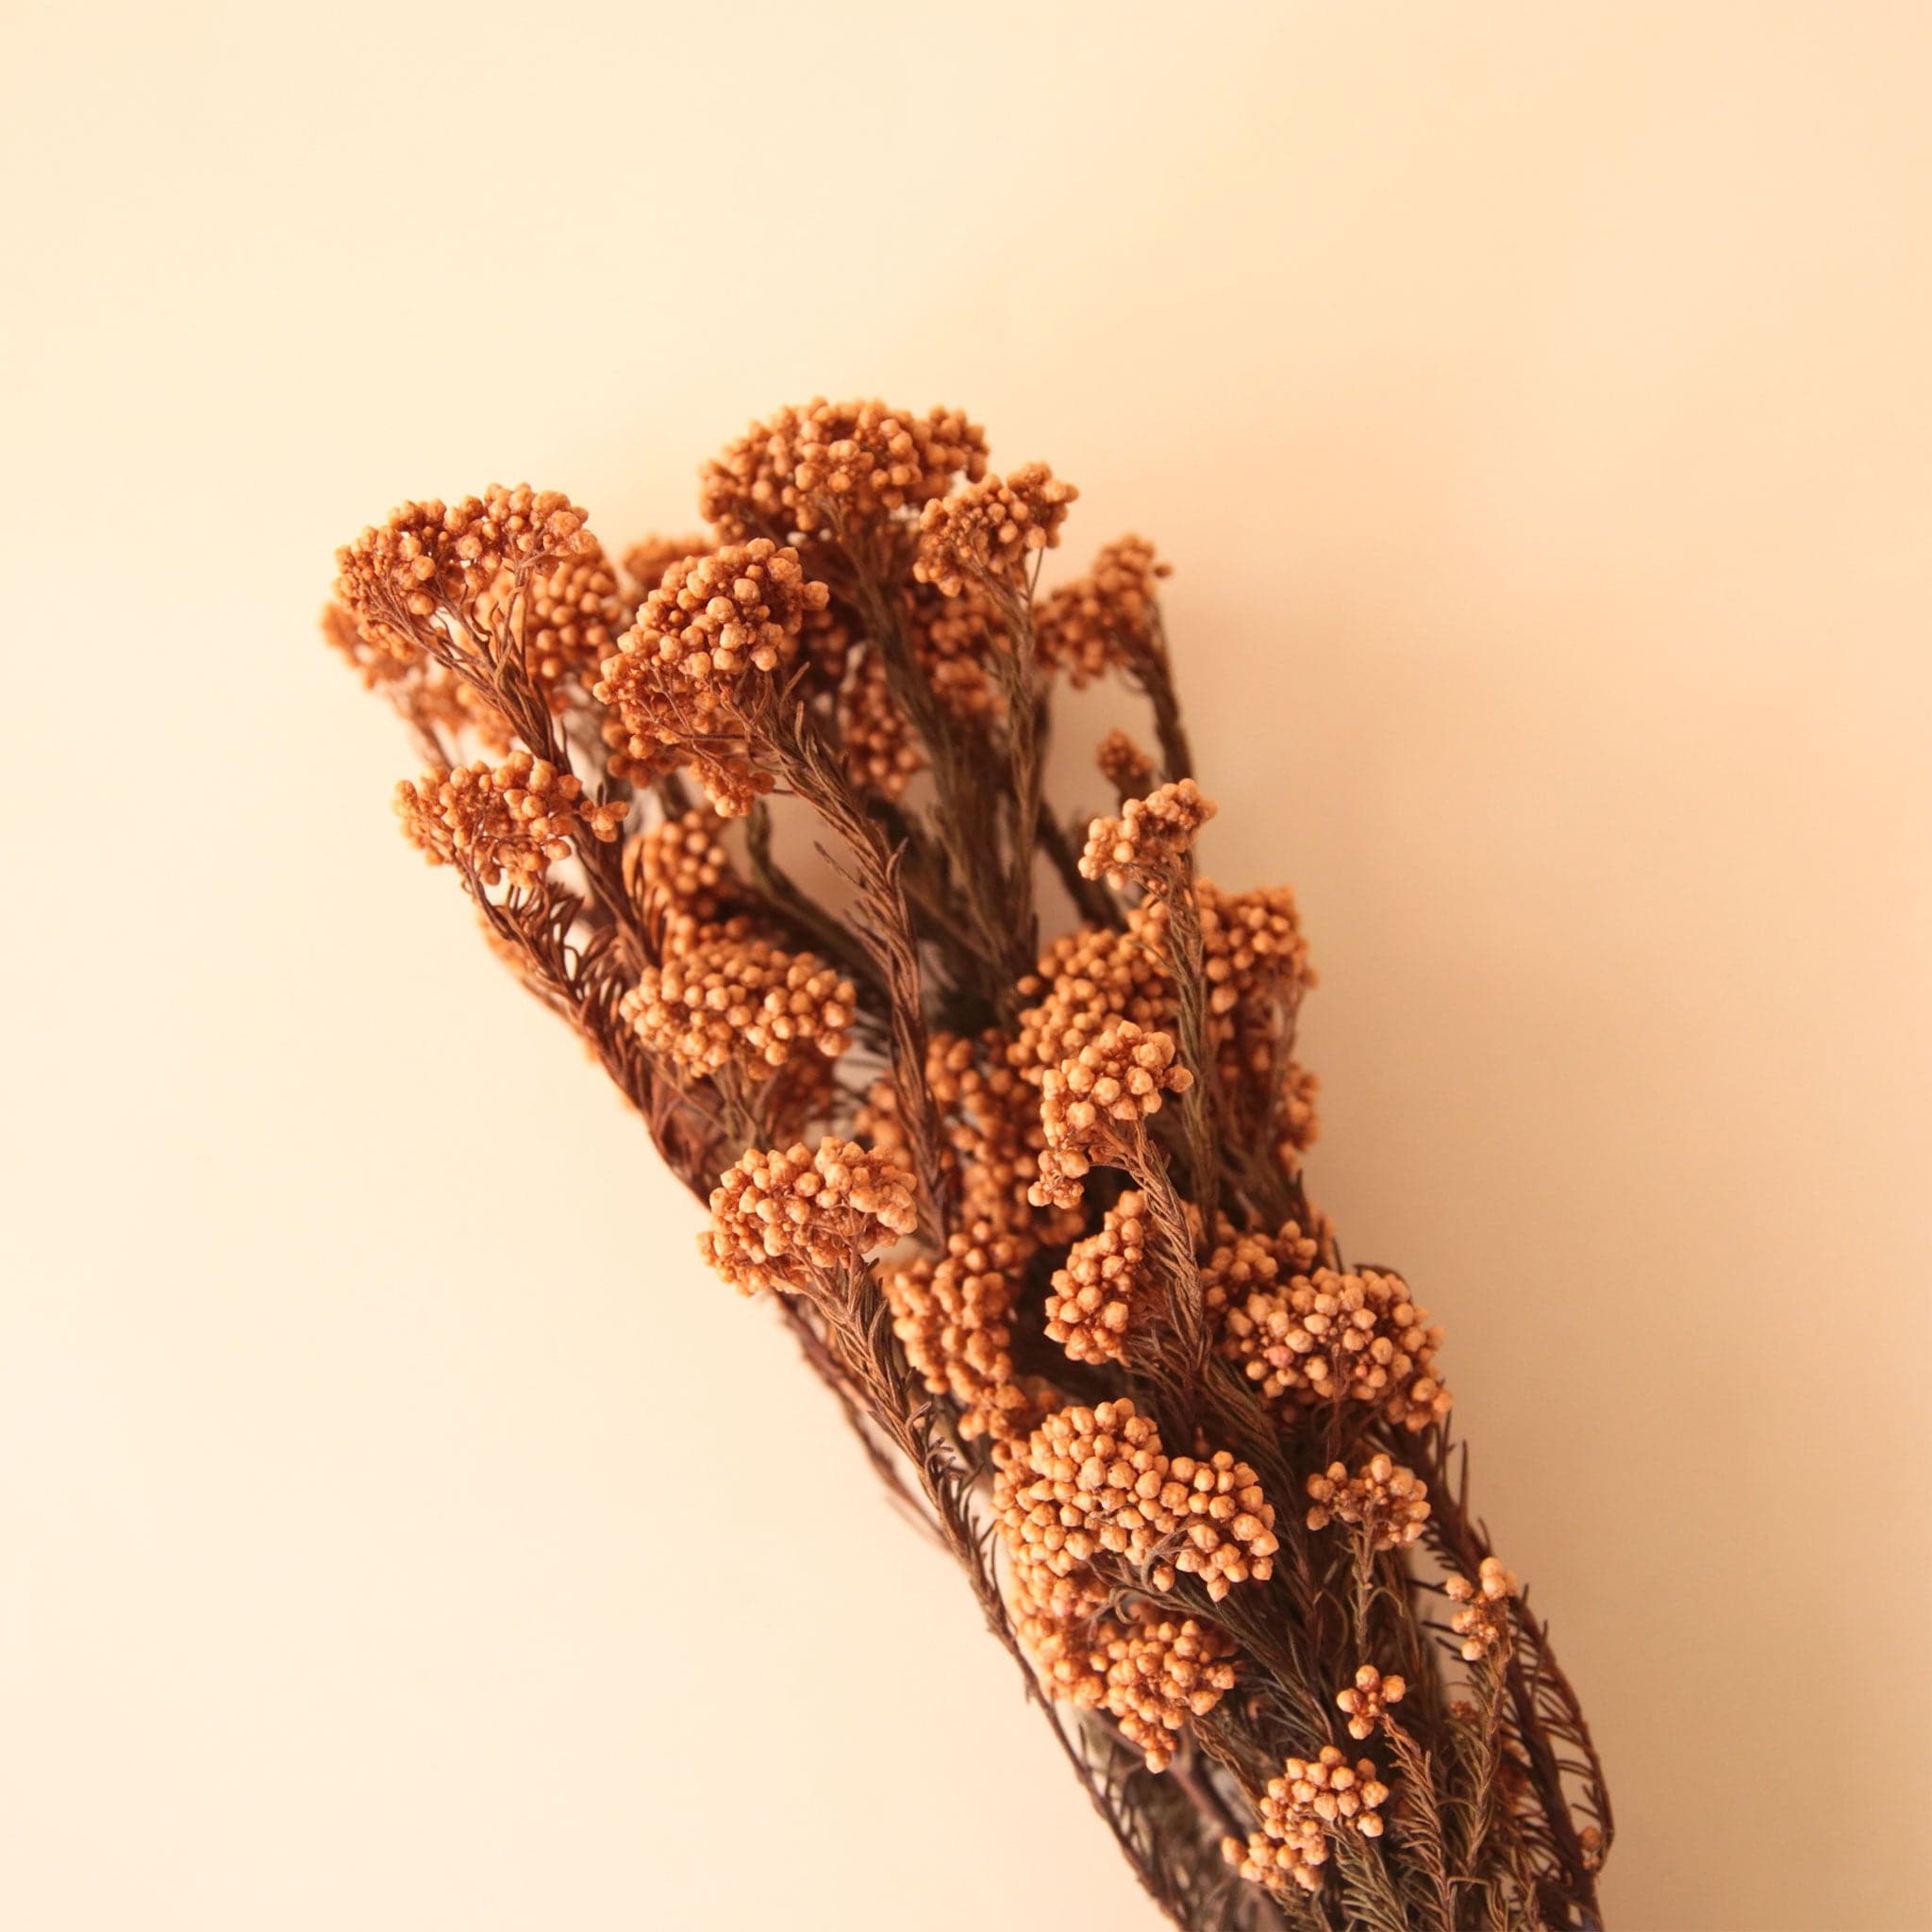 Stems of dried orange flowers that are clusters of small flowers per stem.